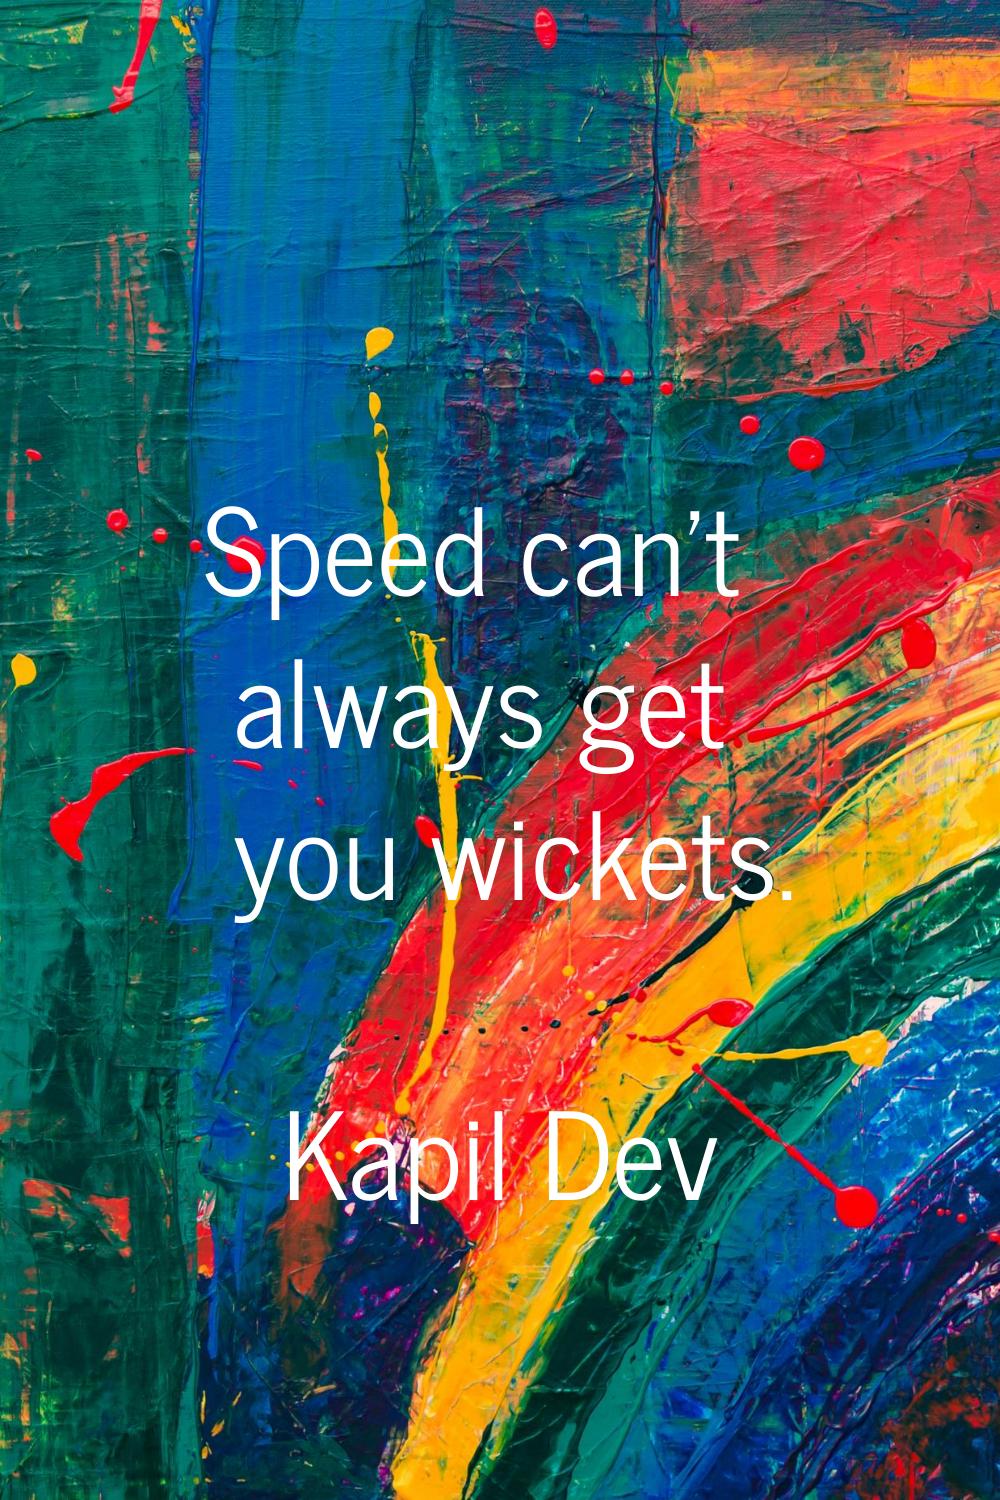 Speed can't always get you wickets.